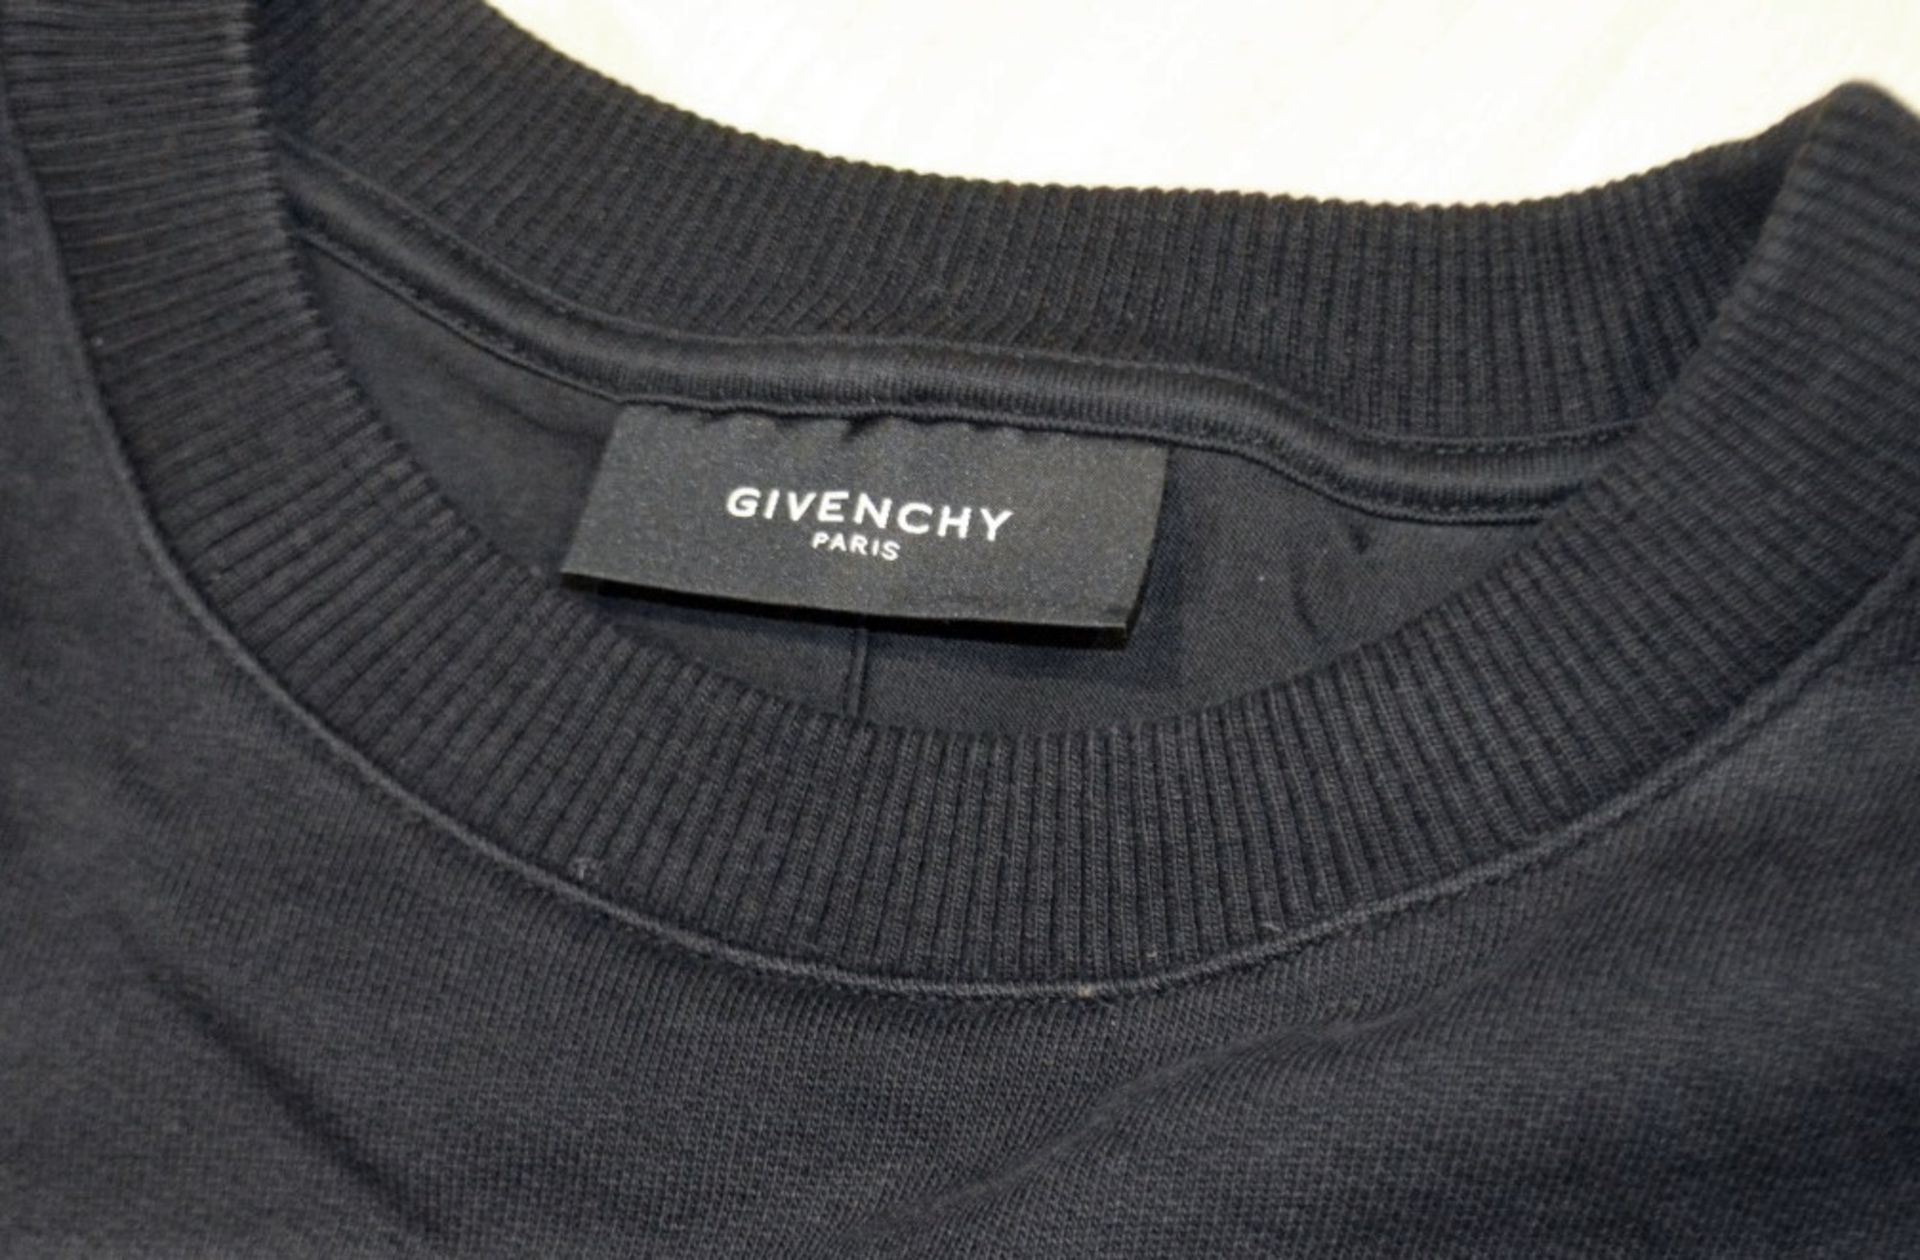 1 x Men's Genuine Givenchy Sweatshirt Top In Black - Size: Medium - Preowned In Very Good - Image 4 of 7